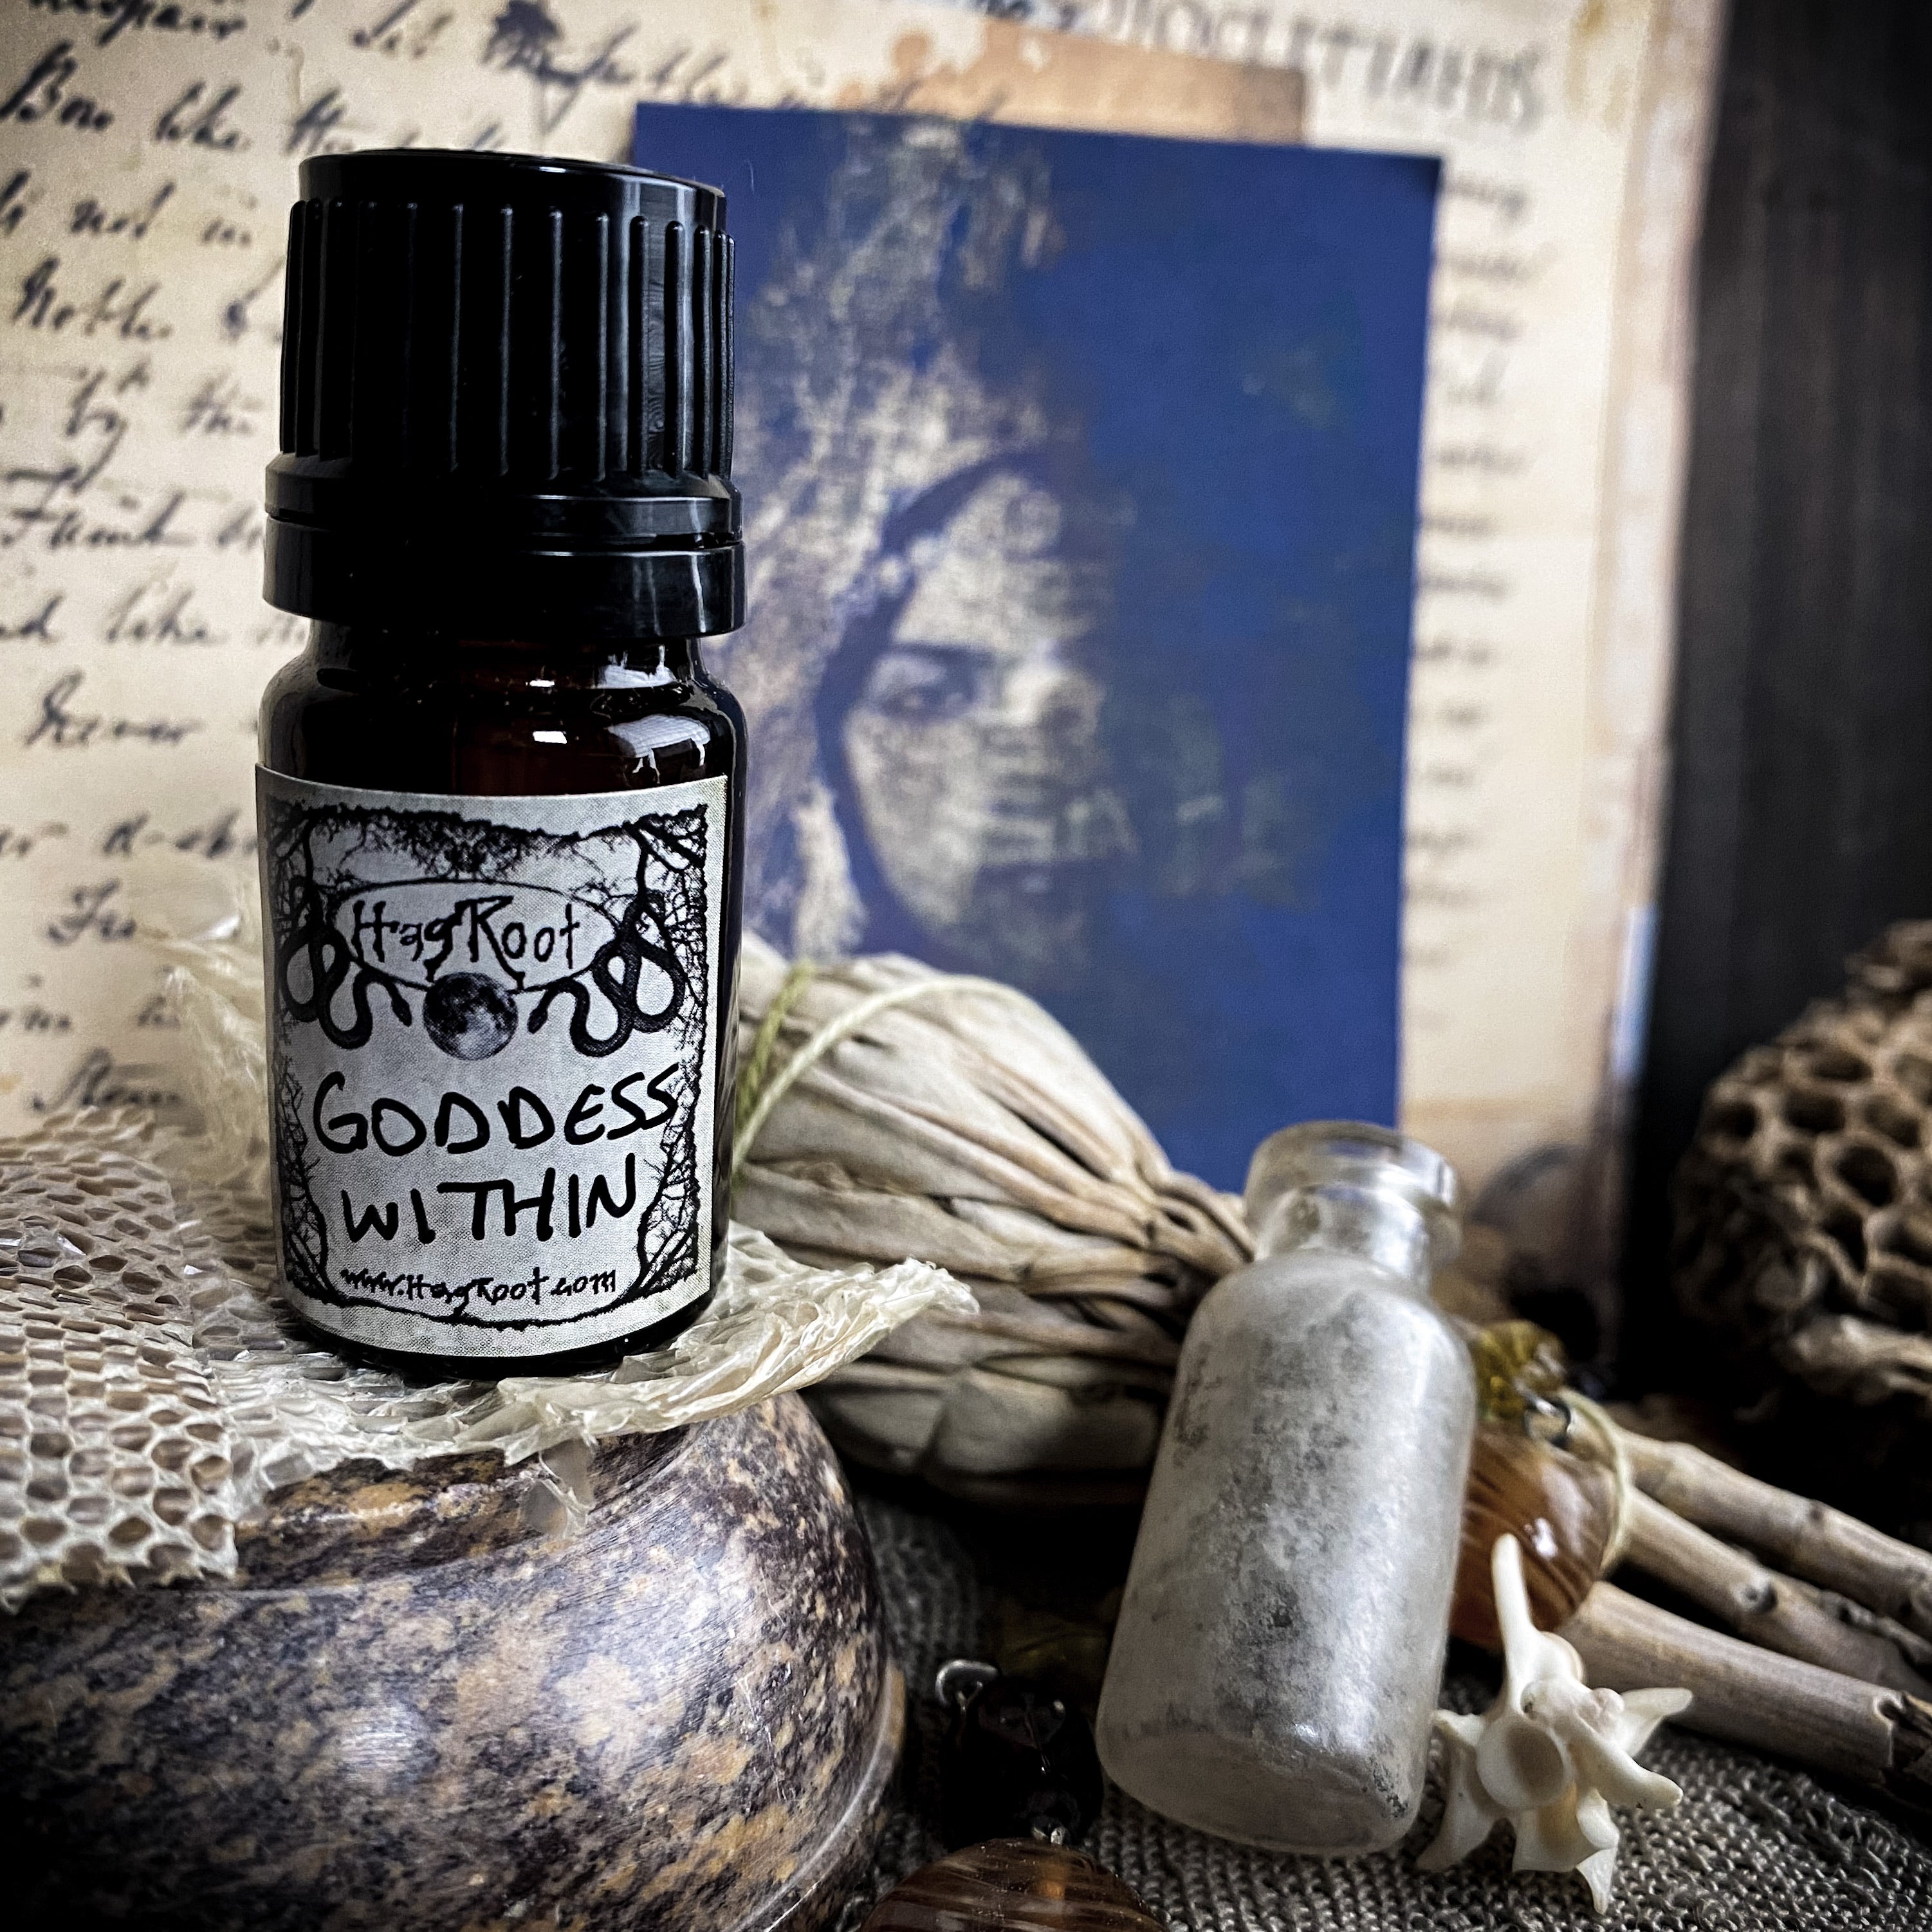 GODDESS WITHIN-(Patchouli, Bergamot, Clove, Lavender)-Perfume, Anointing, Ritual Oil for Confidence, Strength, Motivation, Clarity, Balance and Creativity